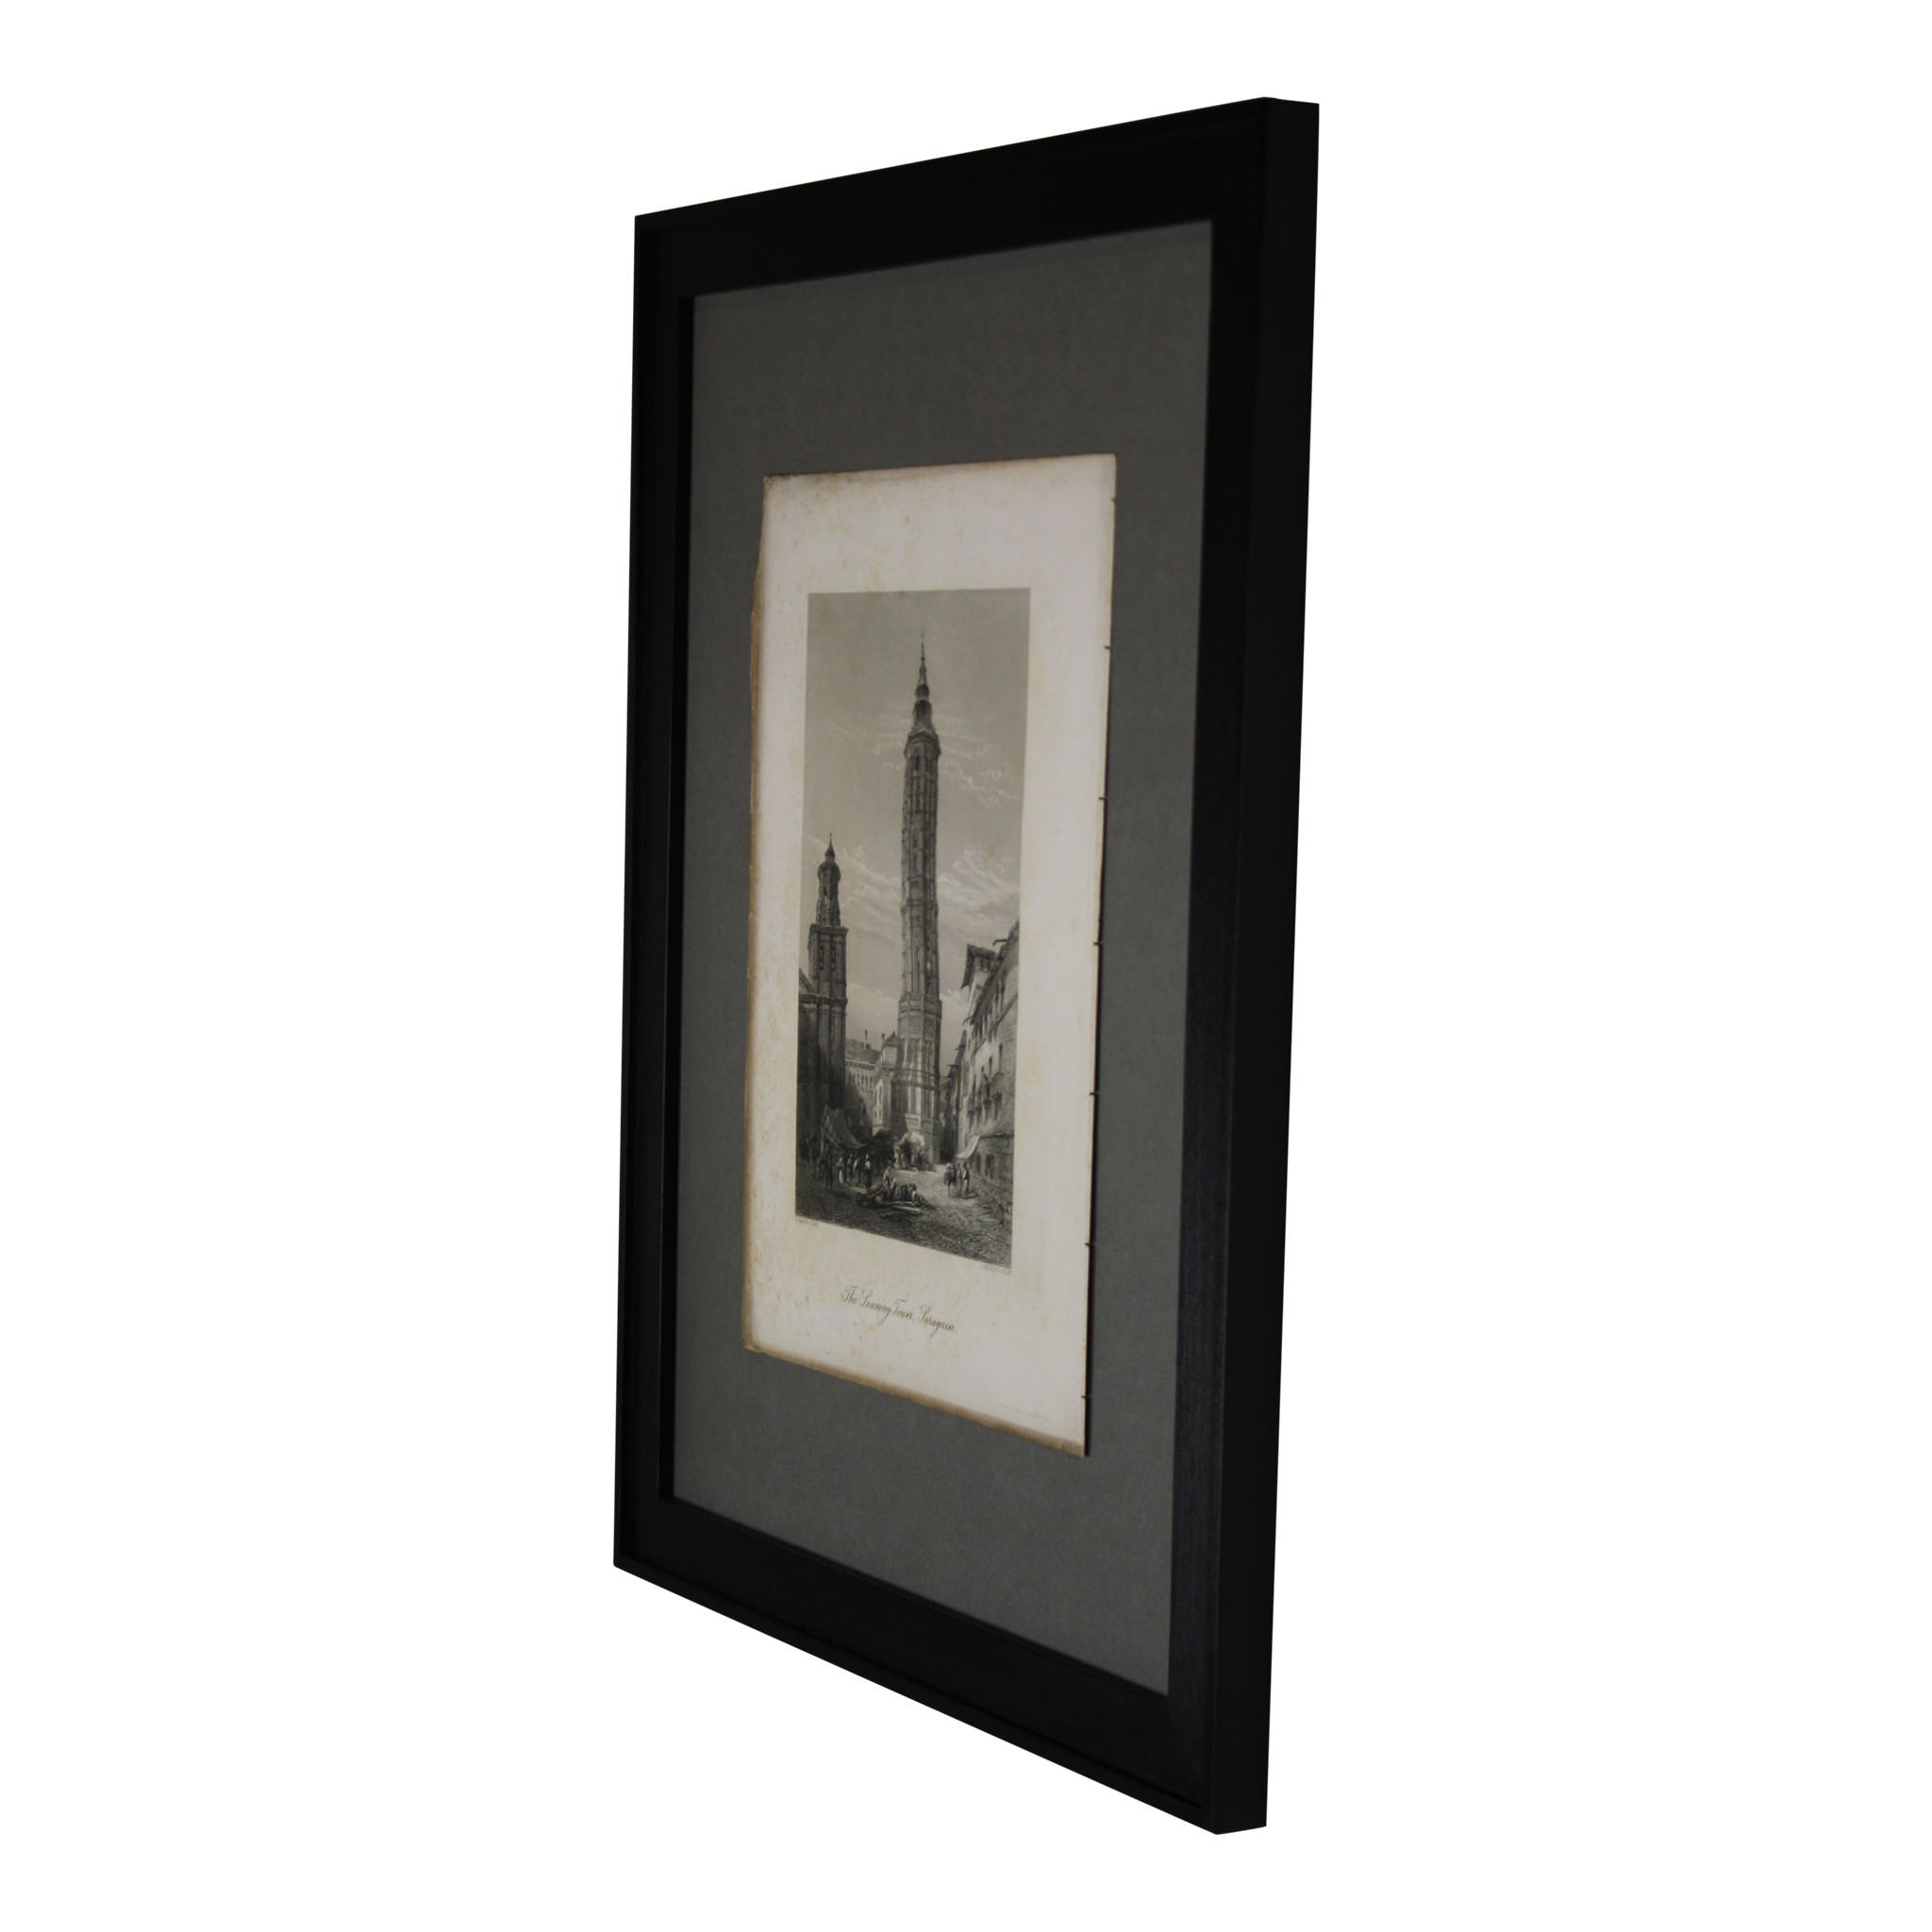 The Leaning Tower, Saragossa Framed Picture